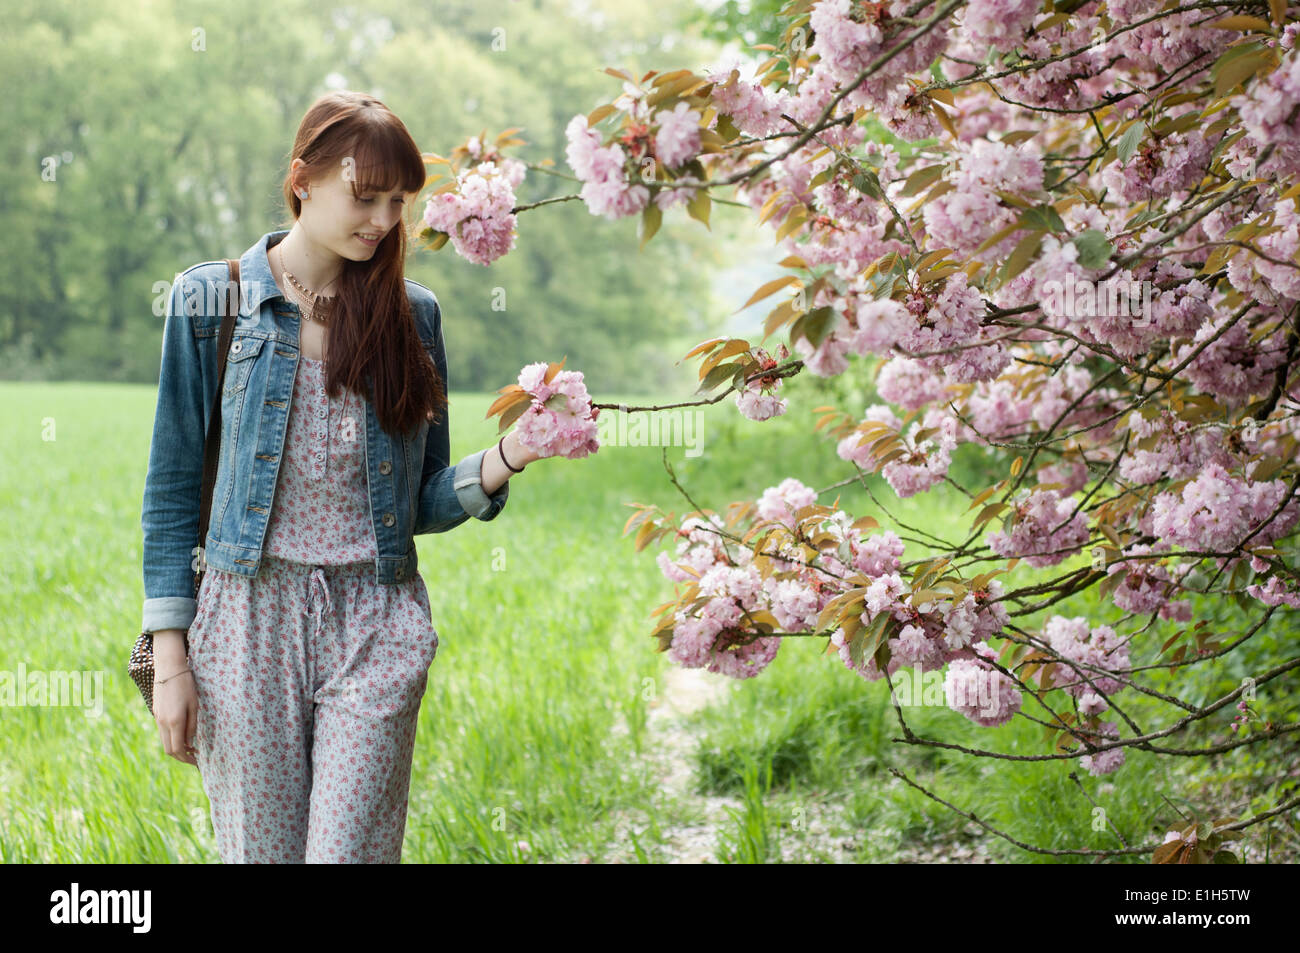 Young woman strolling in field touching blossoms Stock Photo